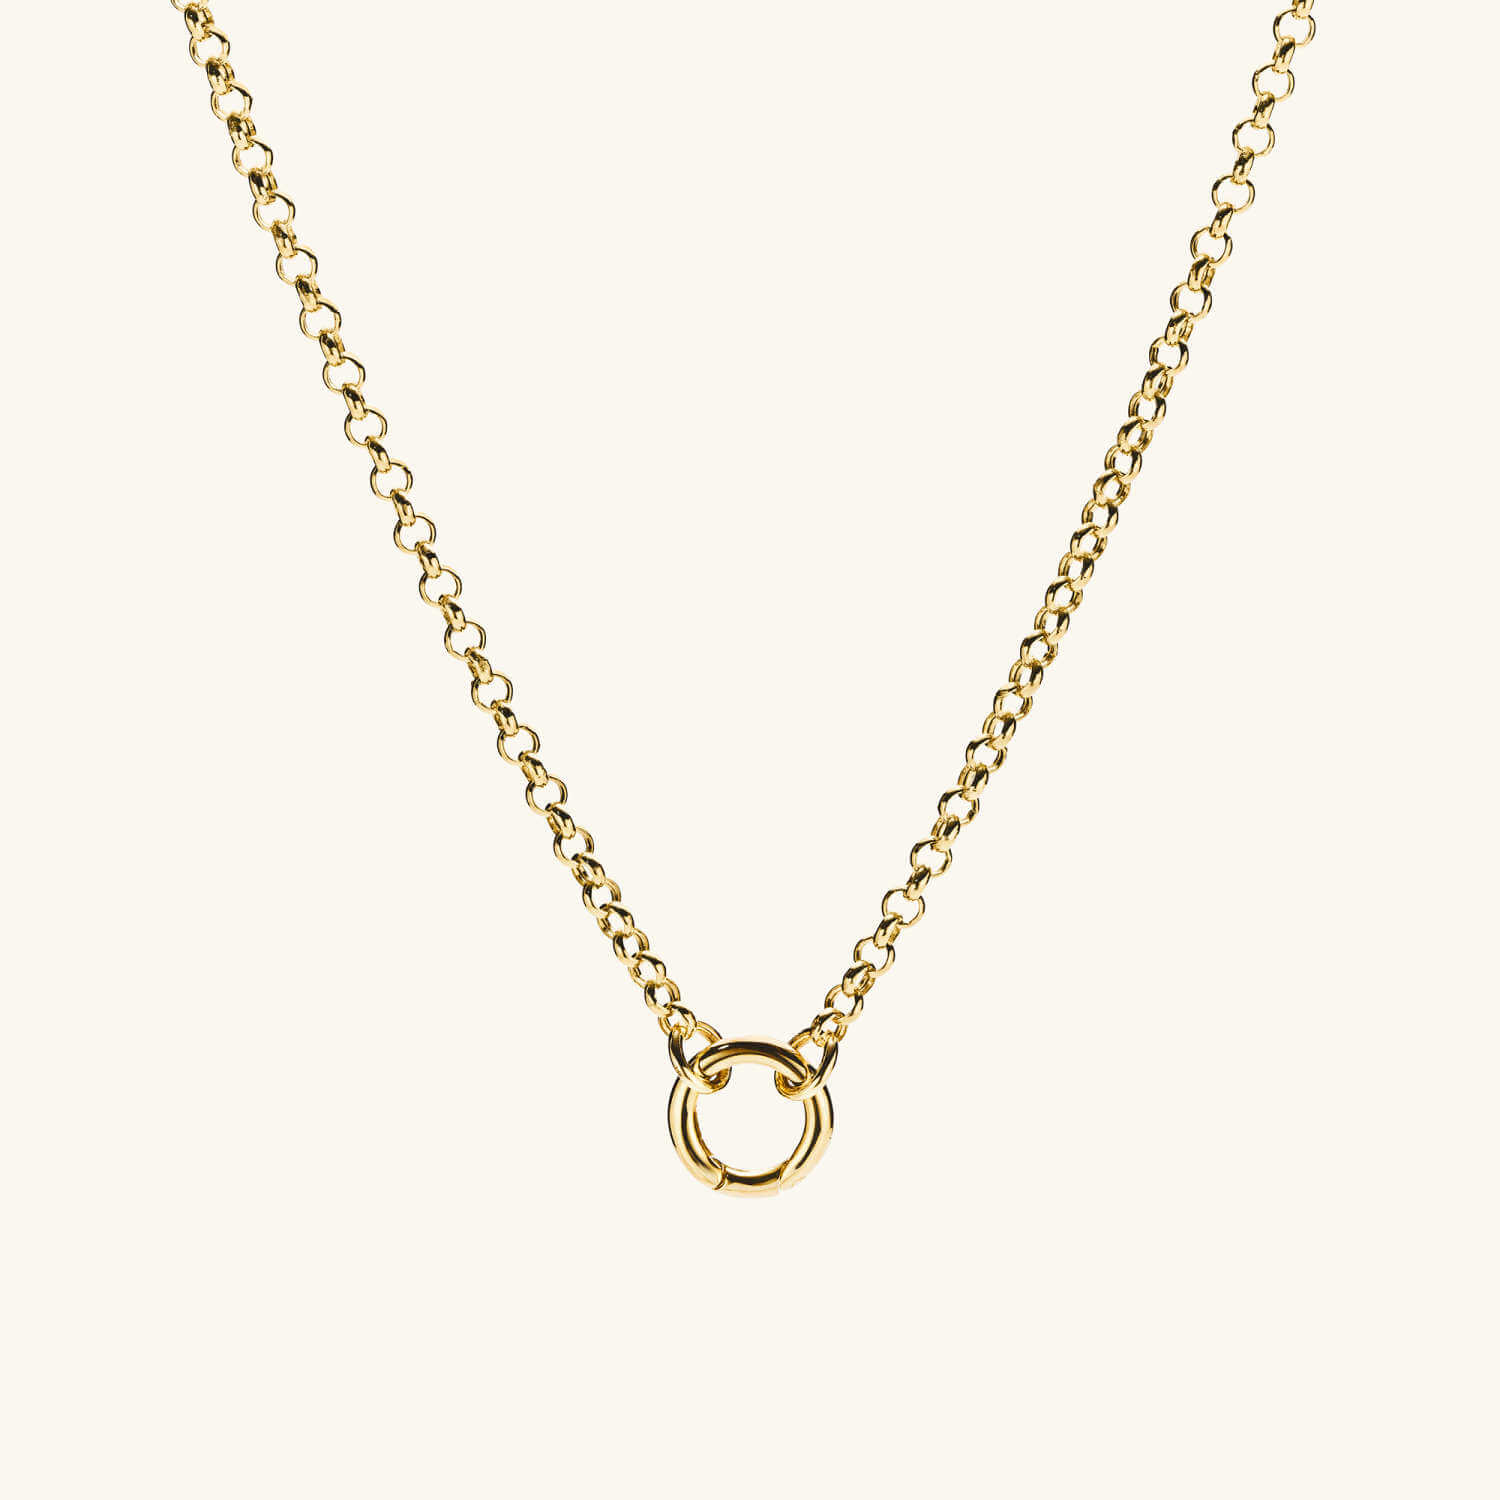 Rolo charm necklace